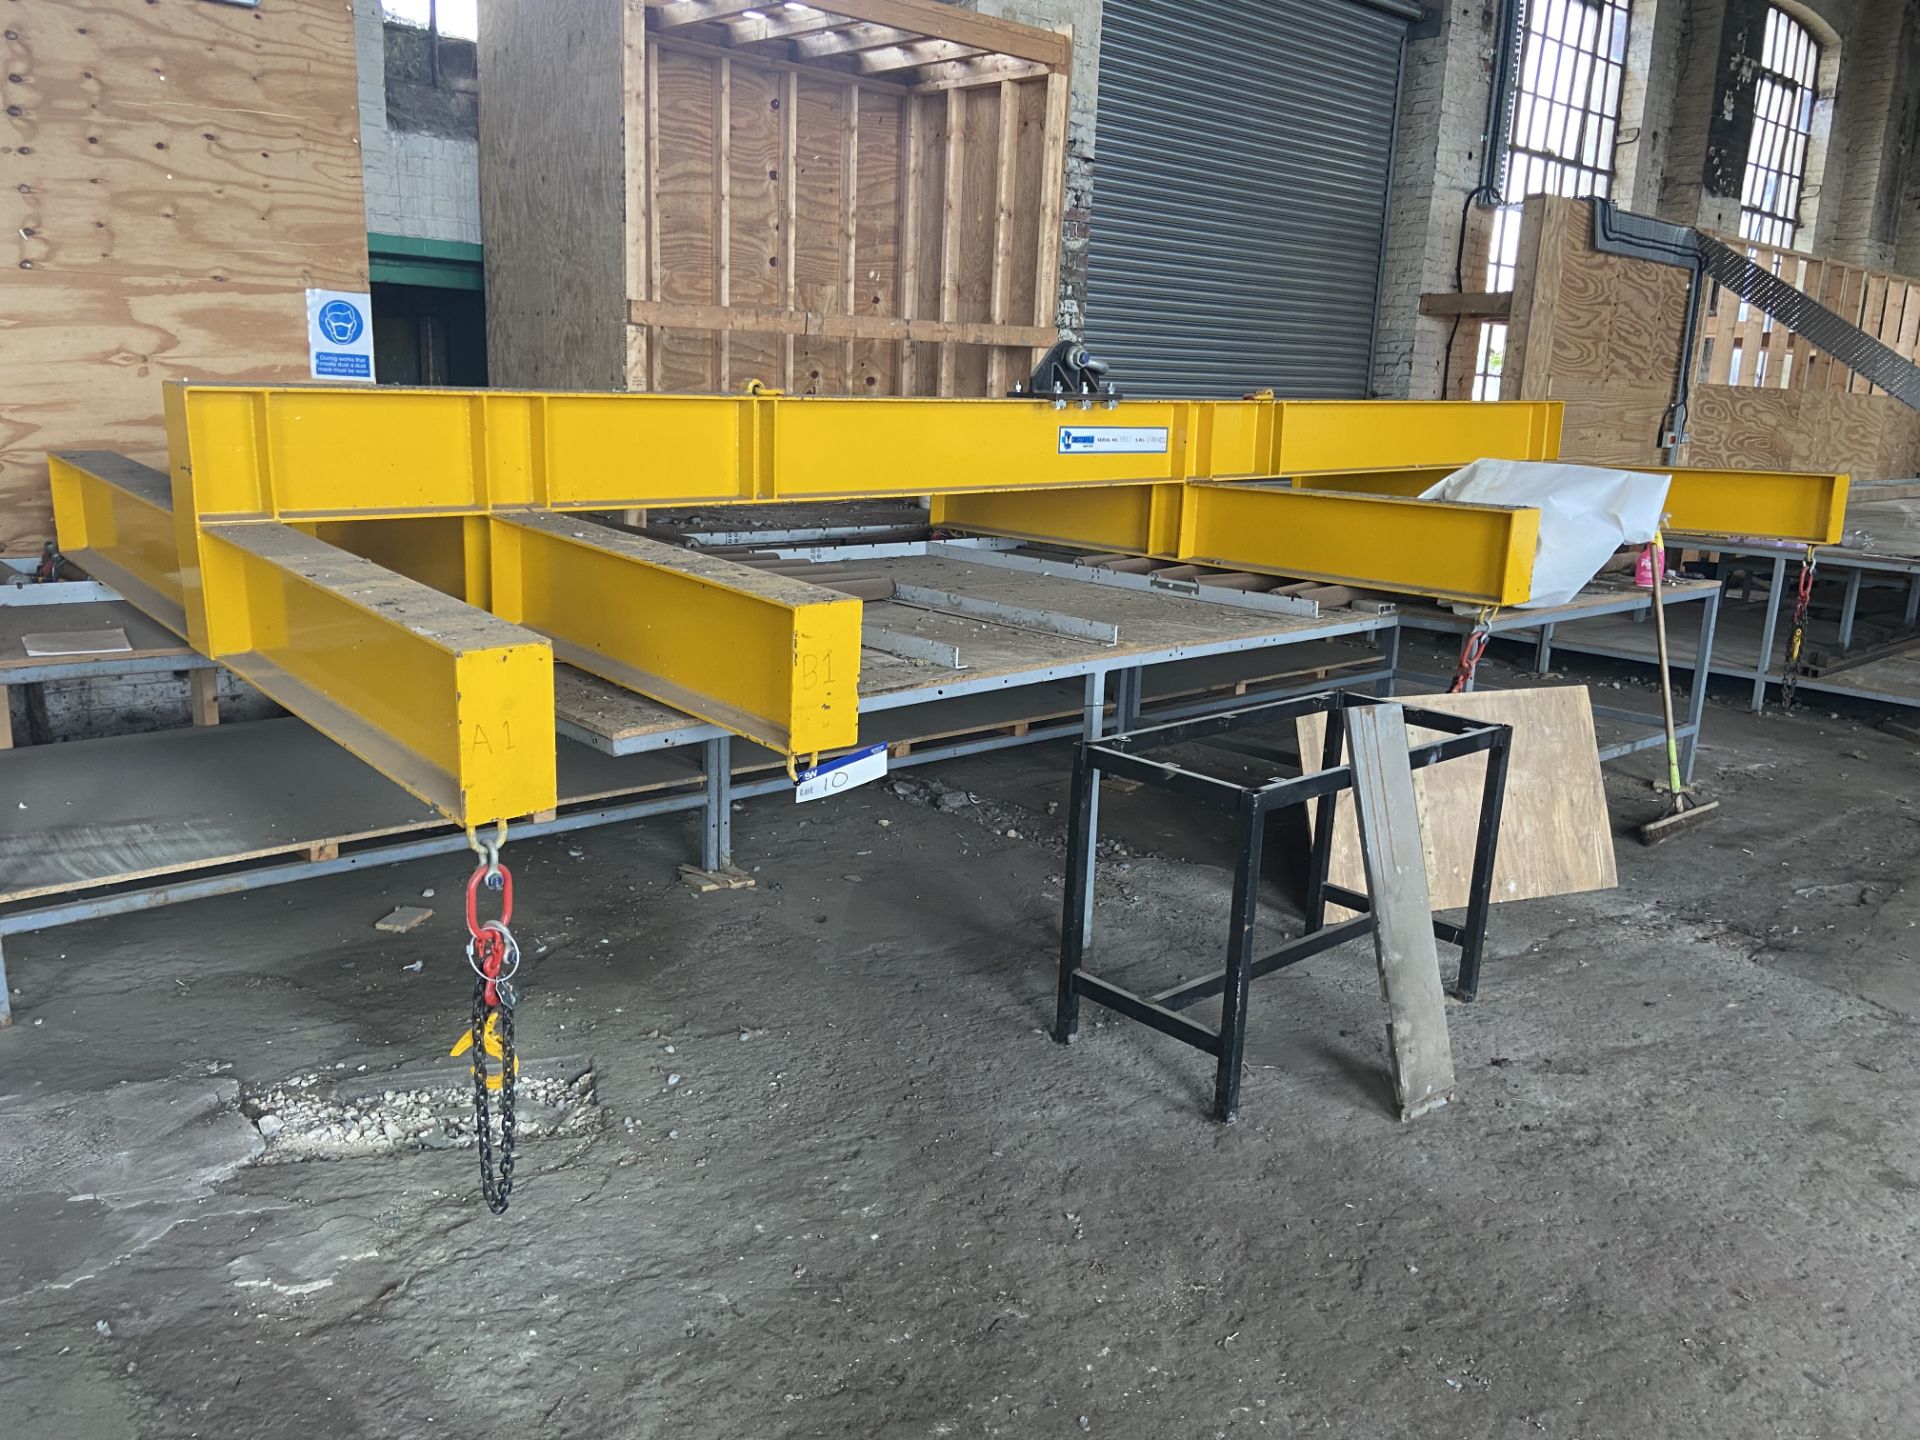 Chesterfield 2000kg SWL Lifting Frame, serial no. 10837, approx. 6.35m x 2.8m Please read the